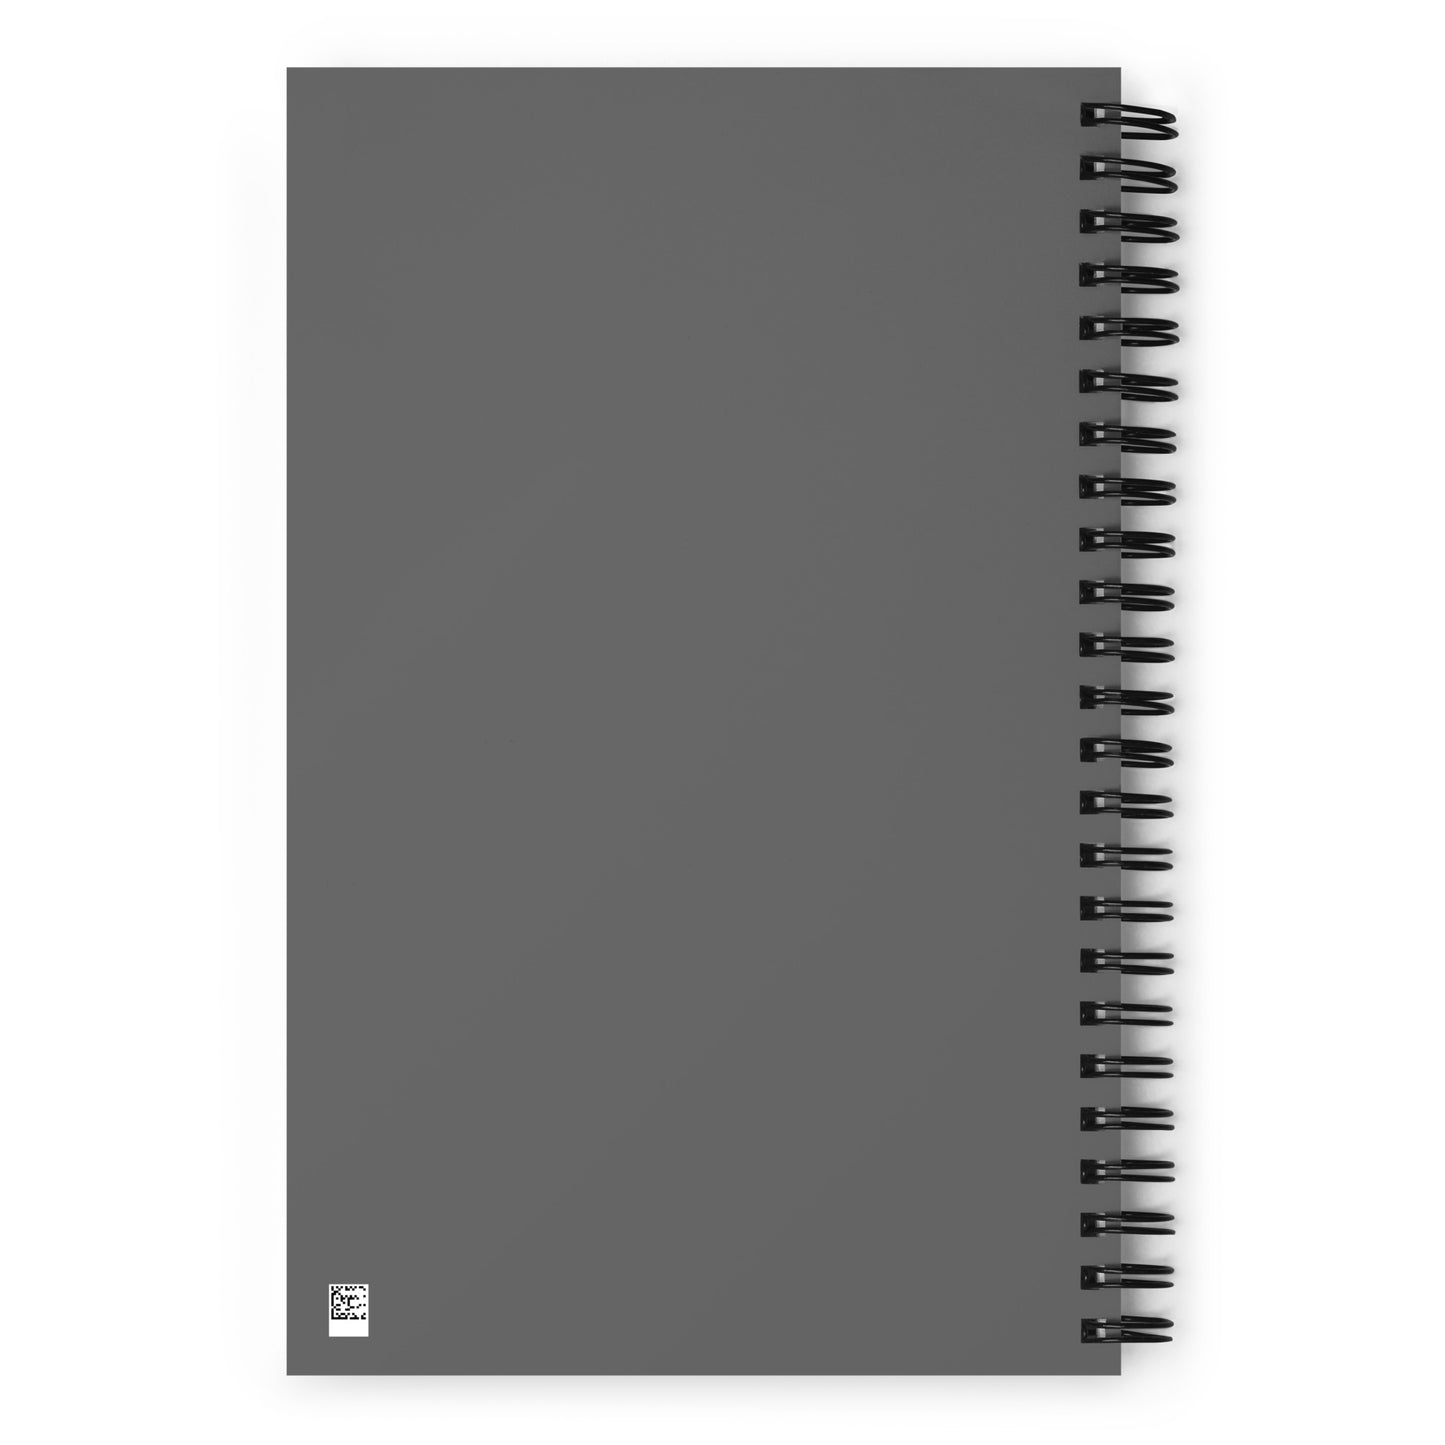 Mobilize & Actualize! Spiral notebook